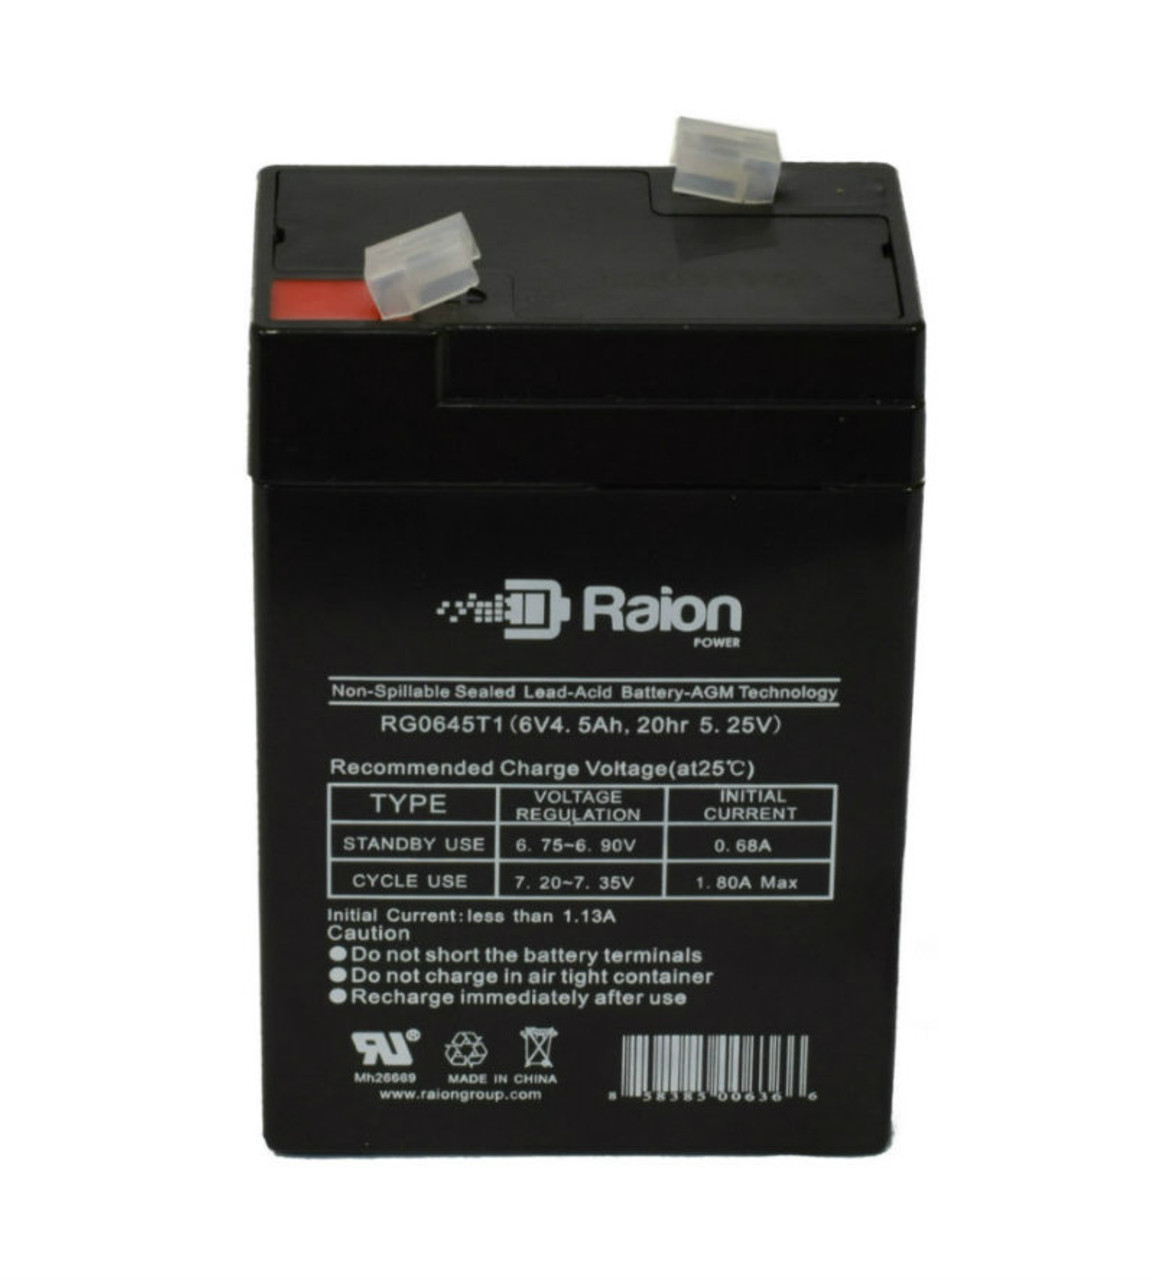 Raion Power RG0645T1 Replacement Battery Cartridge for Light Alarms UX7